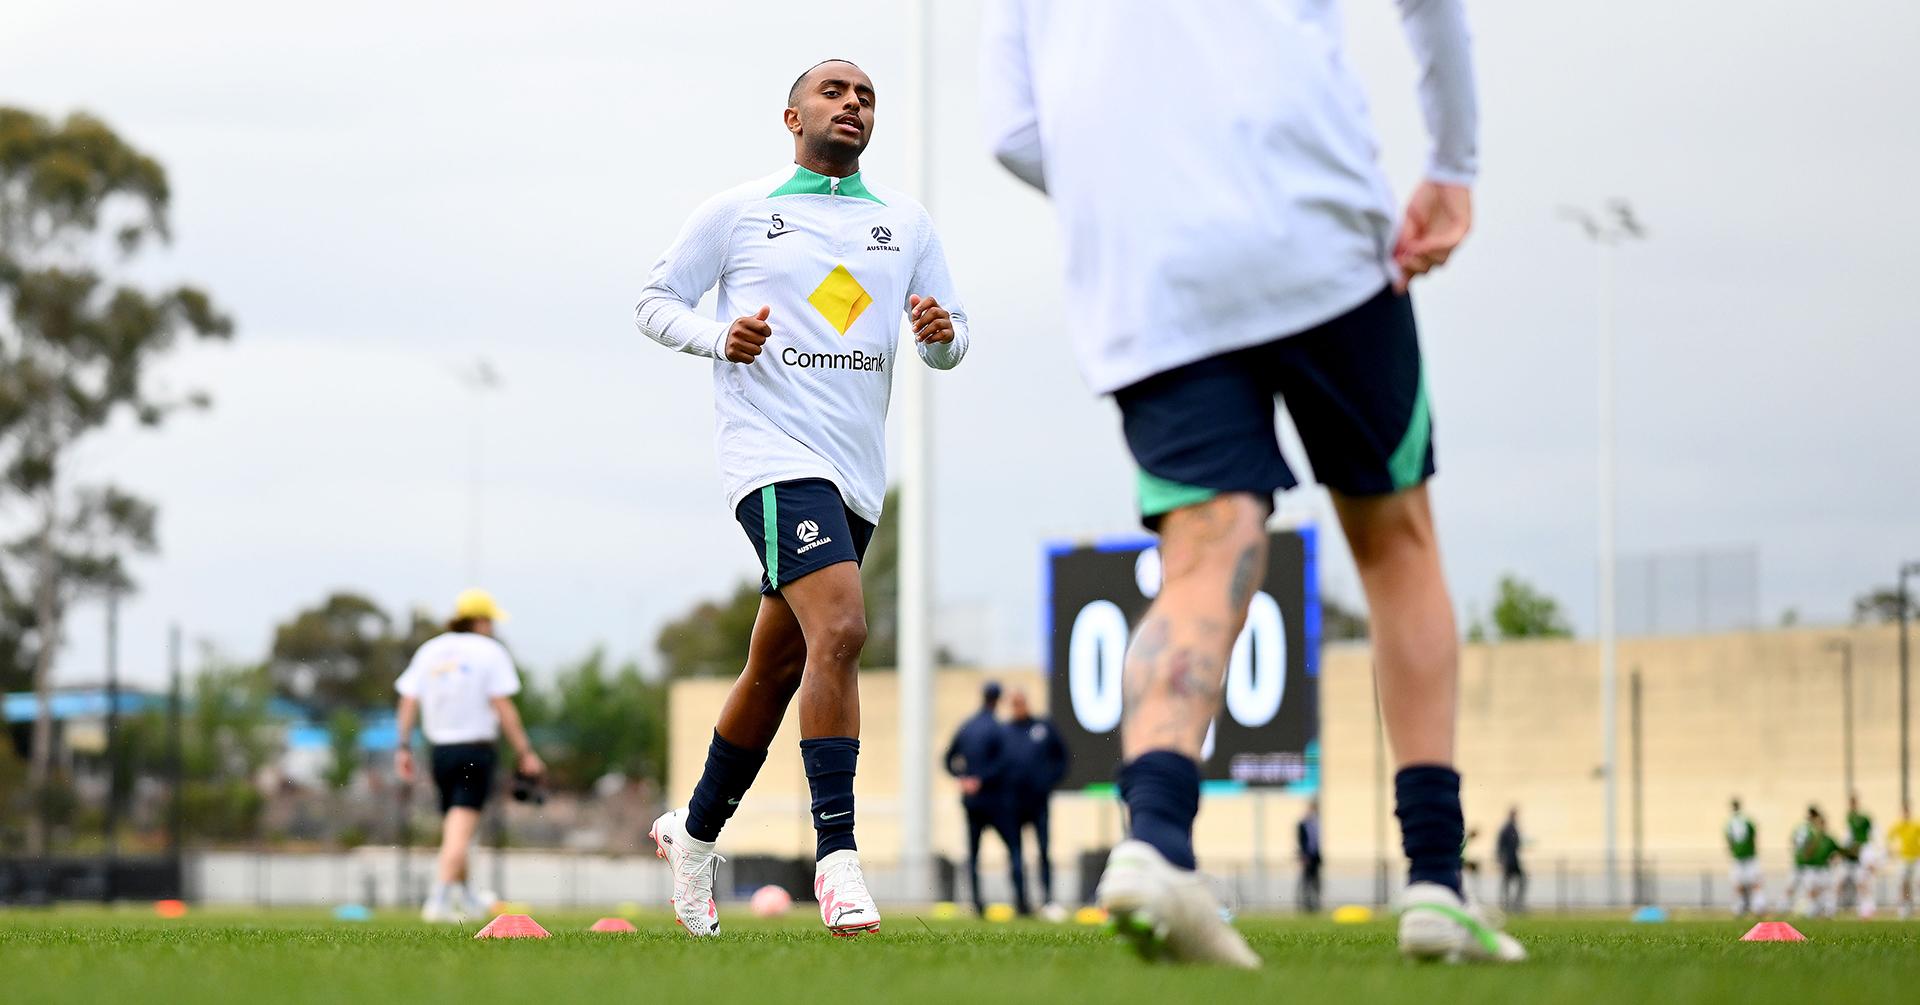 Daniel Campbell in training for the CommBank Pararoos